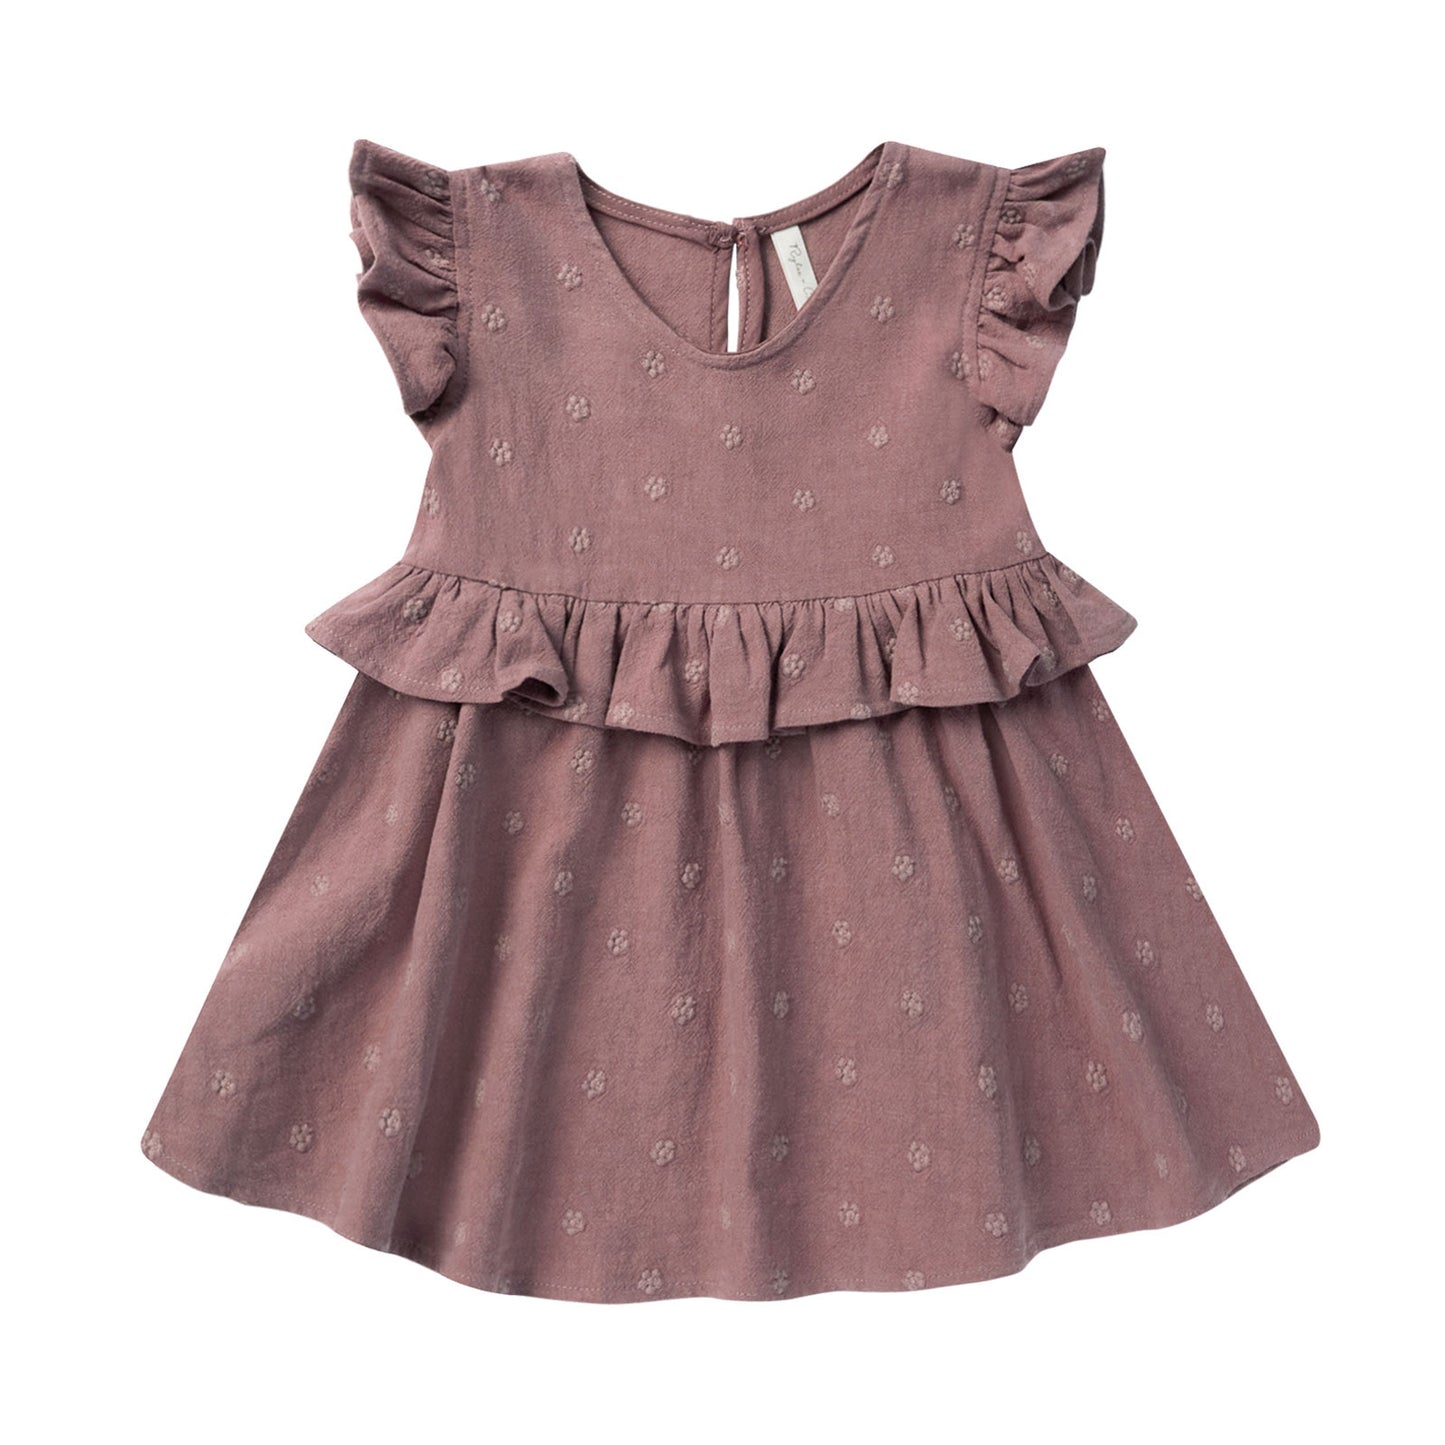 Rylee and Cru Brielle Dress - Mulberry Daisy